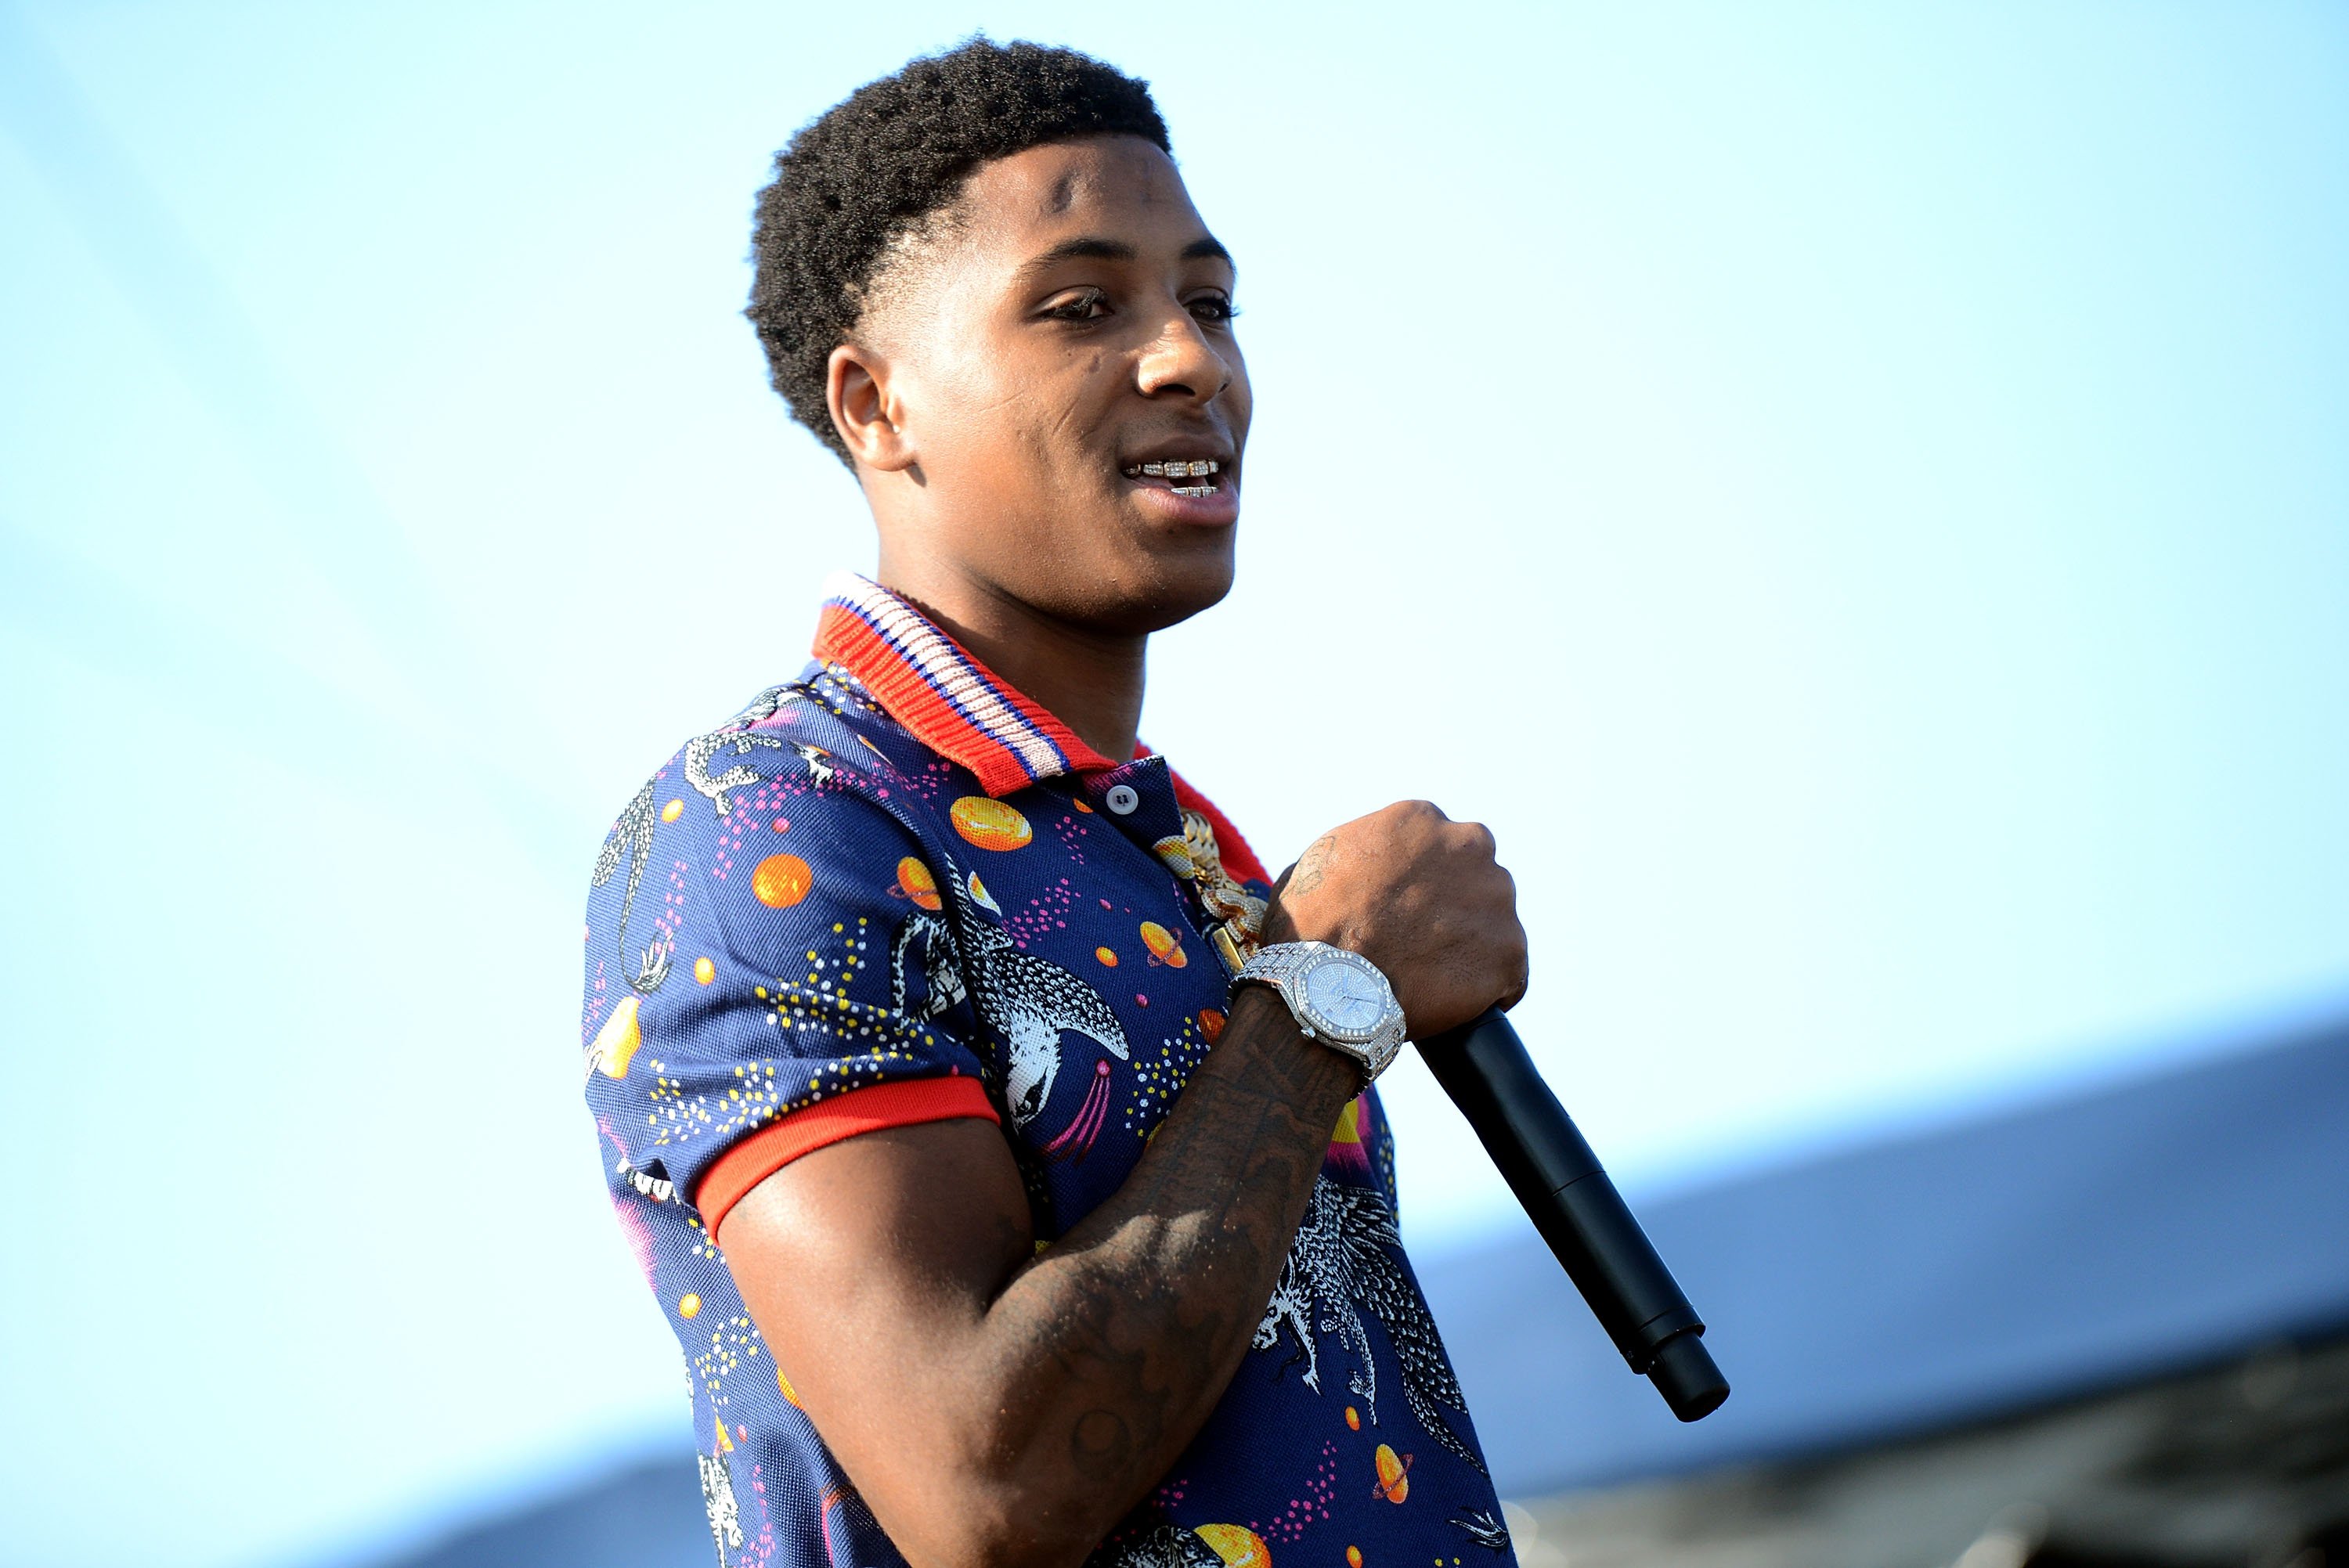 Rapper Youngboy performs onstage during the Day N Night Festival at Angel Stadium of Anaheim on September 10, 2017 in Anaheim, California. | Source: Getty Images